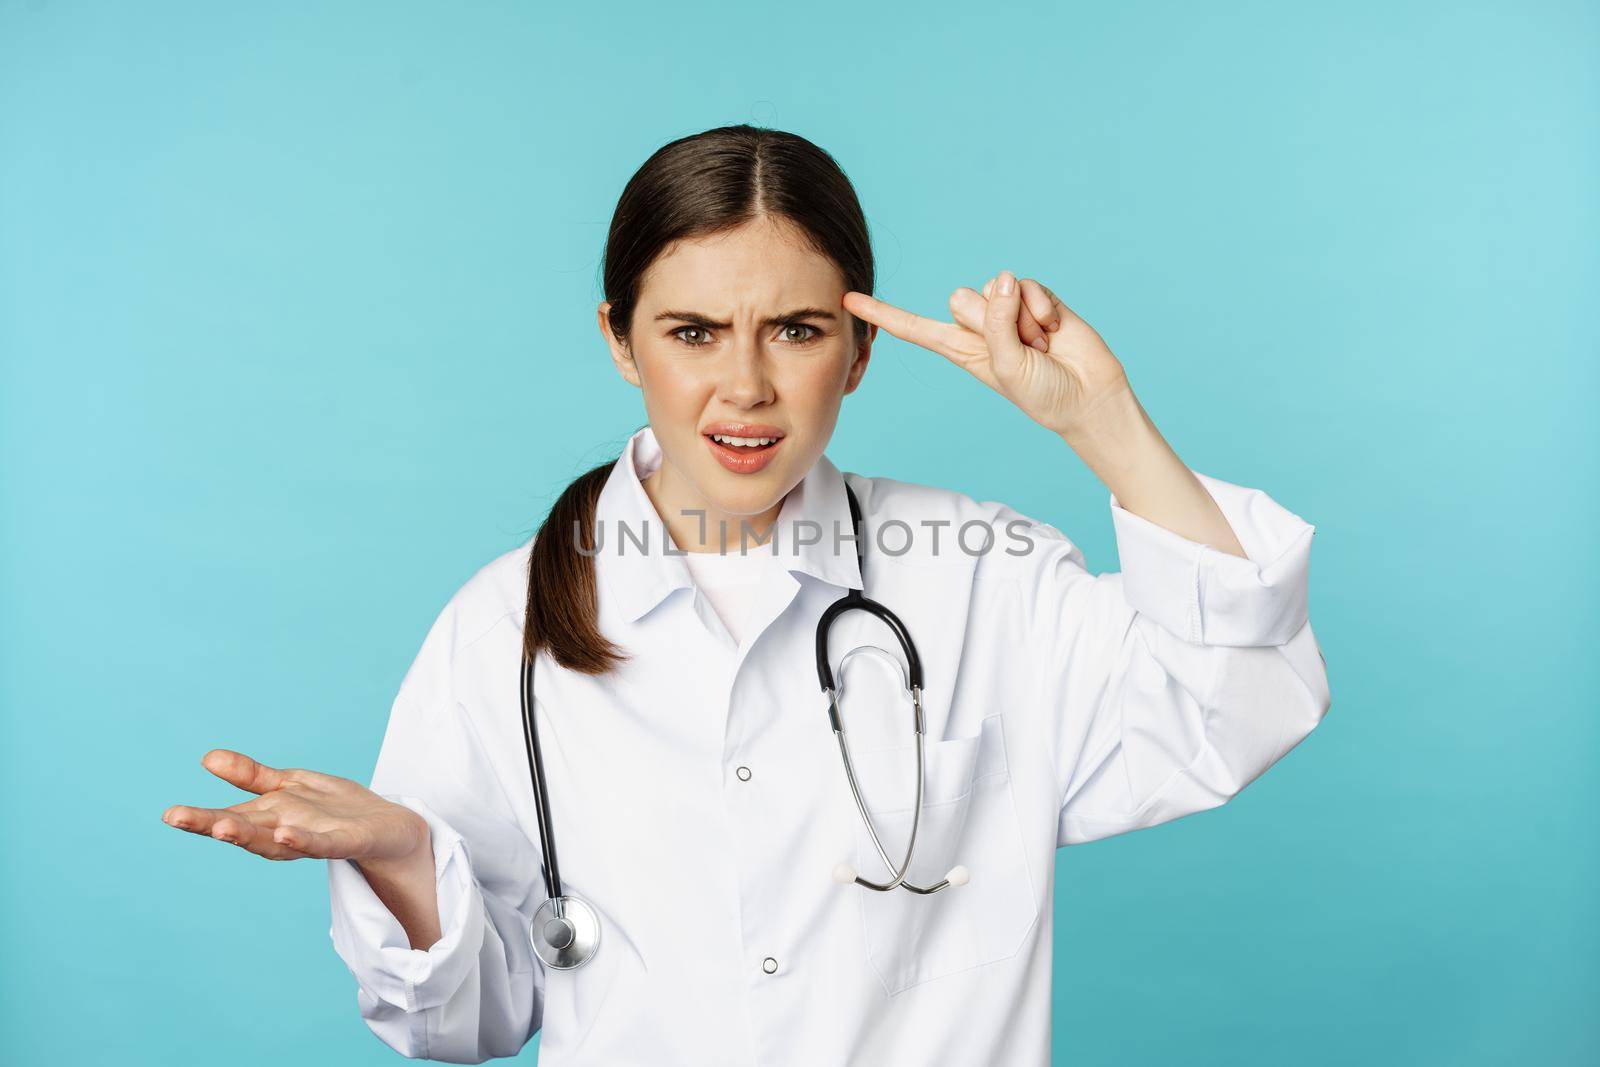 Annoyed woman doctor pointing finger at head, scolding someone stupid, crazy or strange, standing over torquoise background.